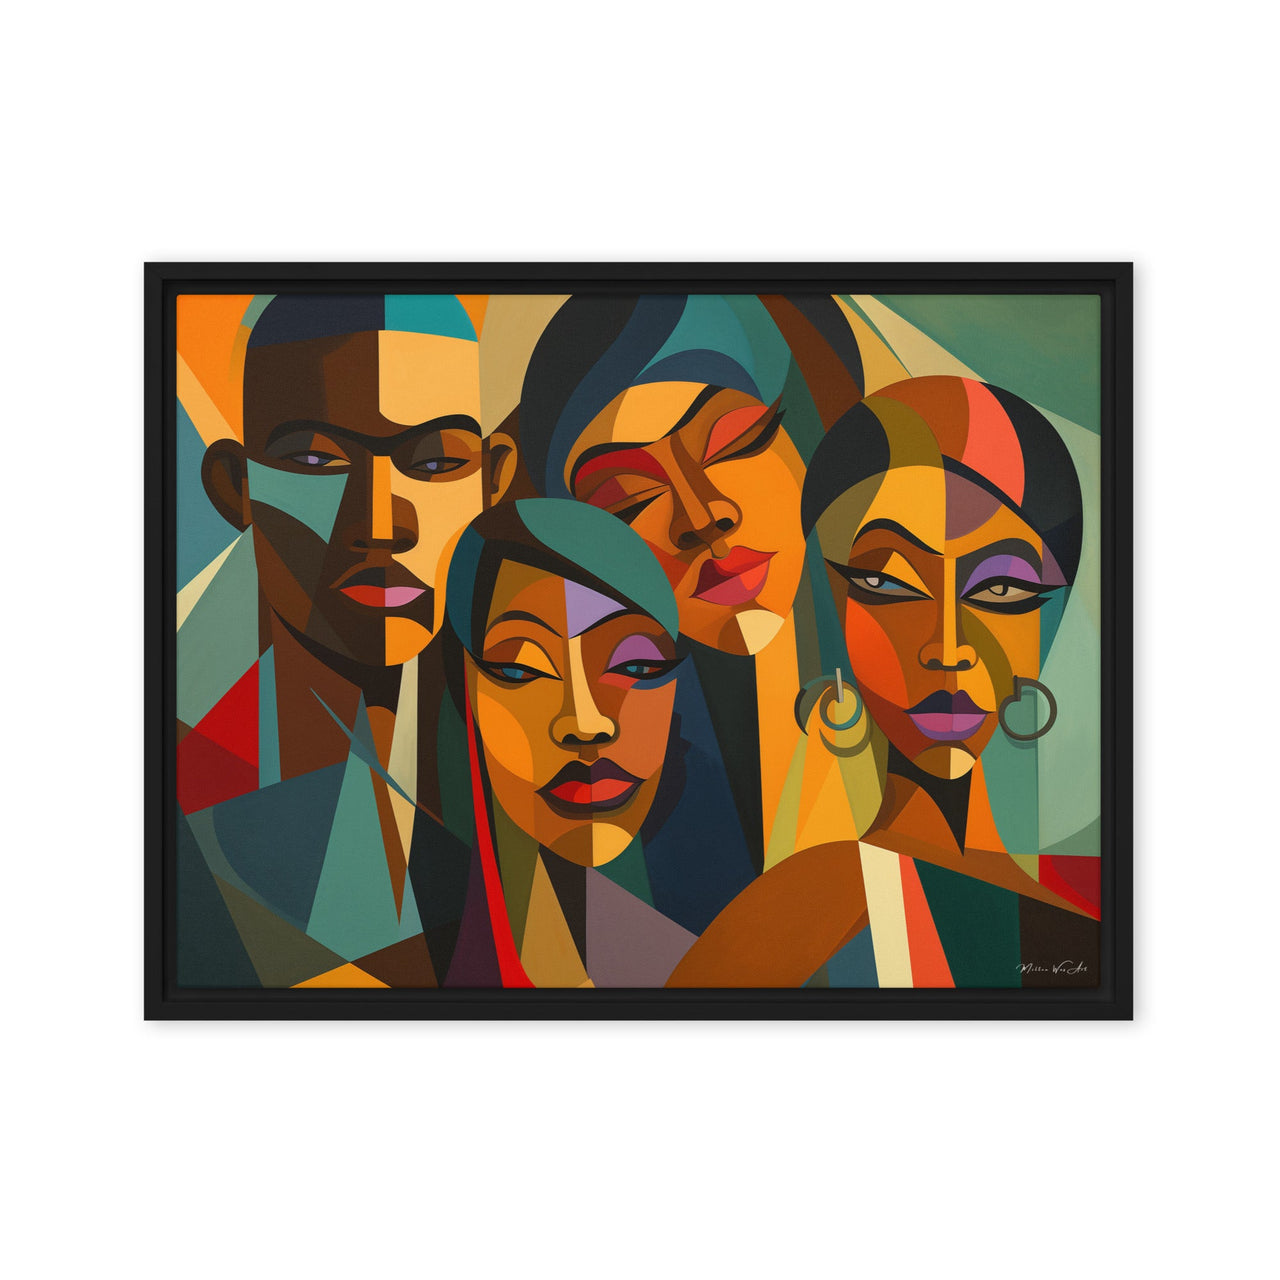 Striking framed canvas print from Milton Wes Art featuring a collage of abstract faces with warm tones, hung above a vintage green tufted sofa, available at miltonwesart.com, Harlem NYC